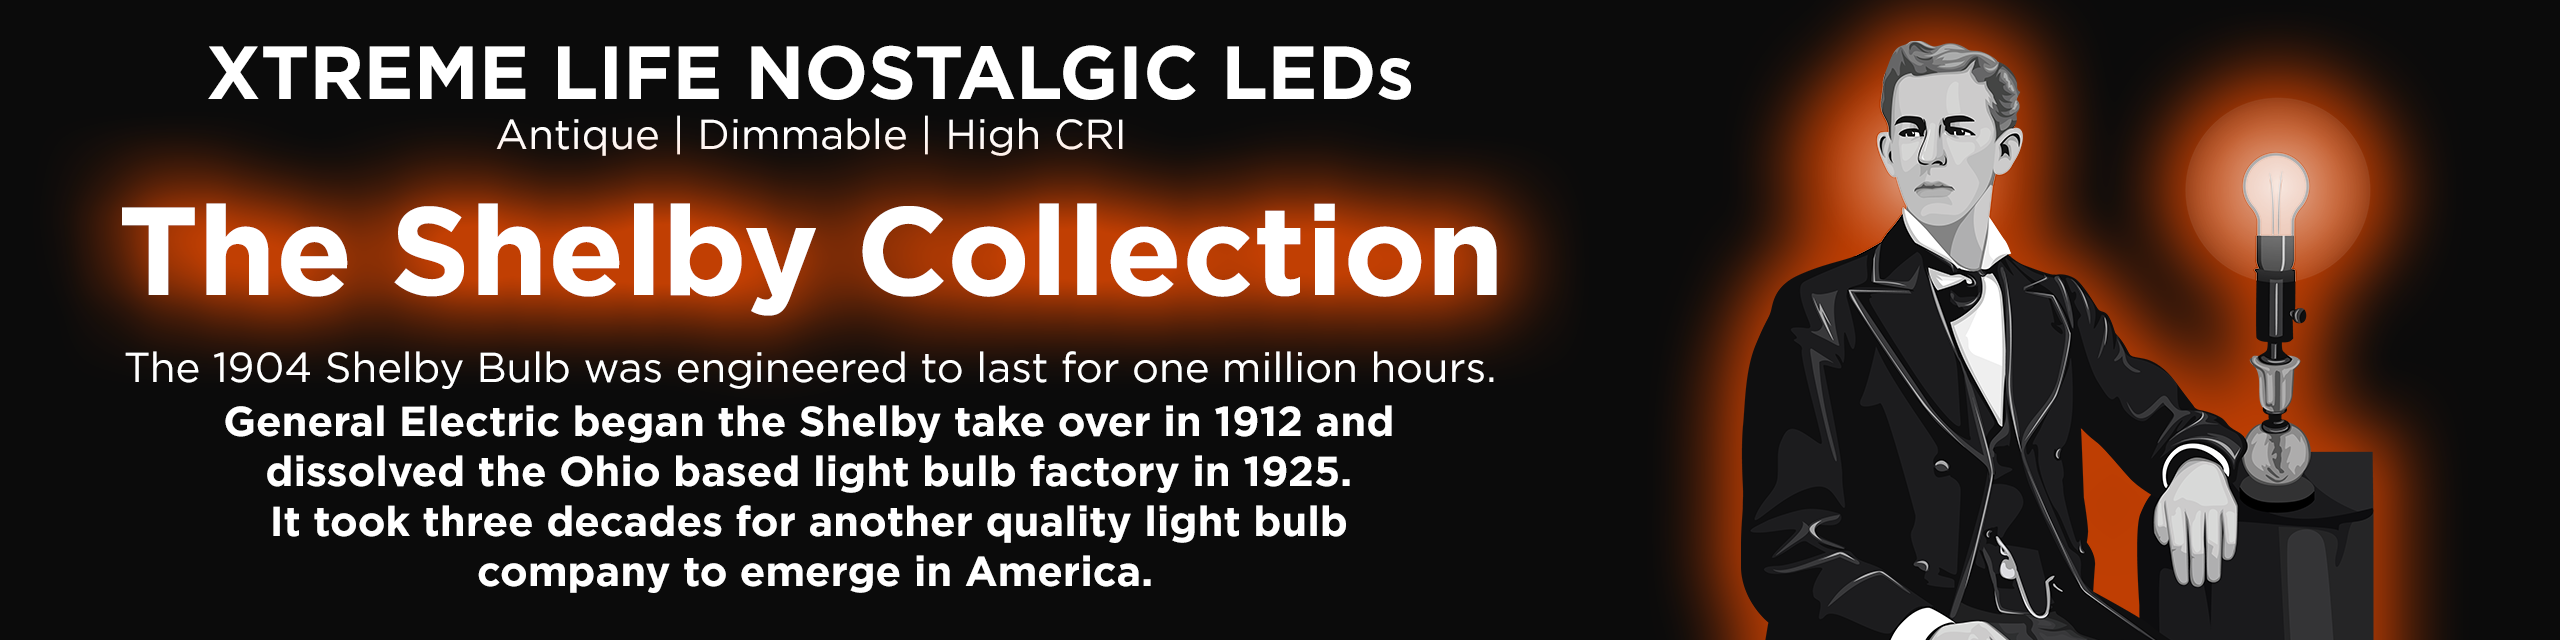 The 1904 Shelby Bulb was designed to last for over one million hours.